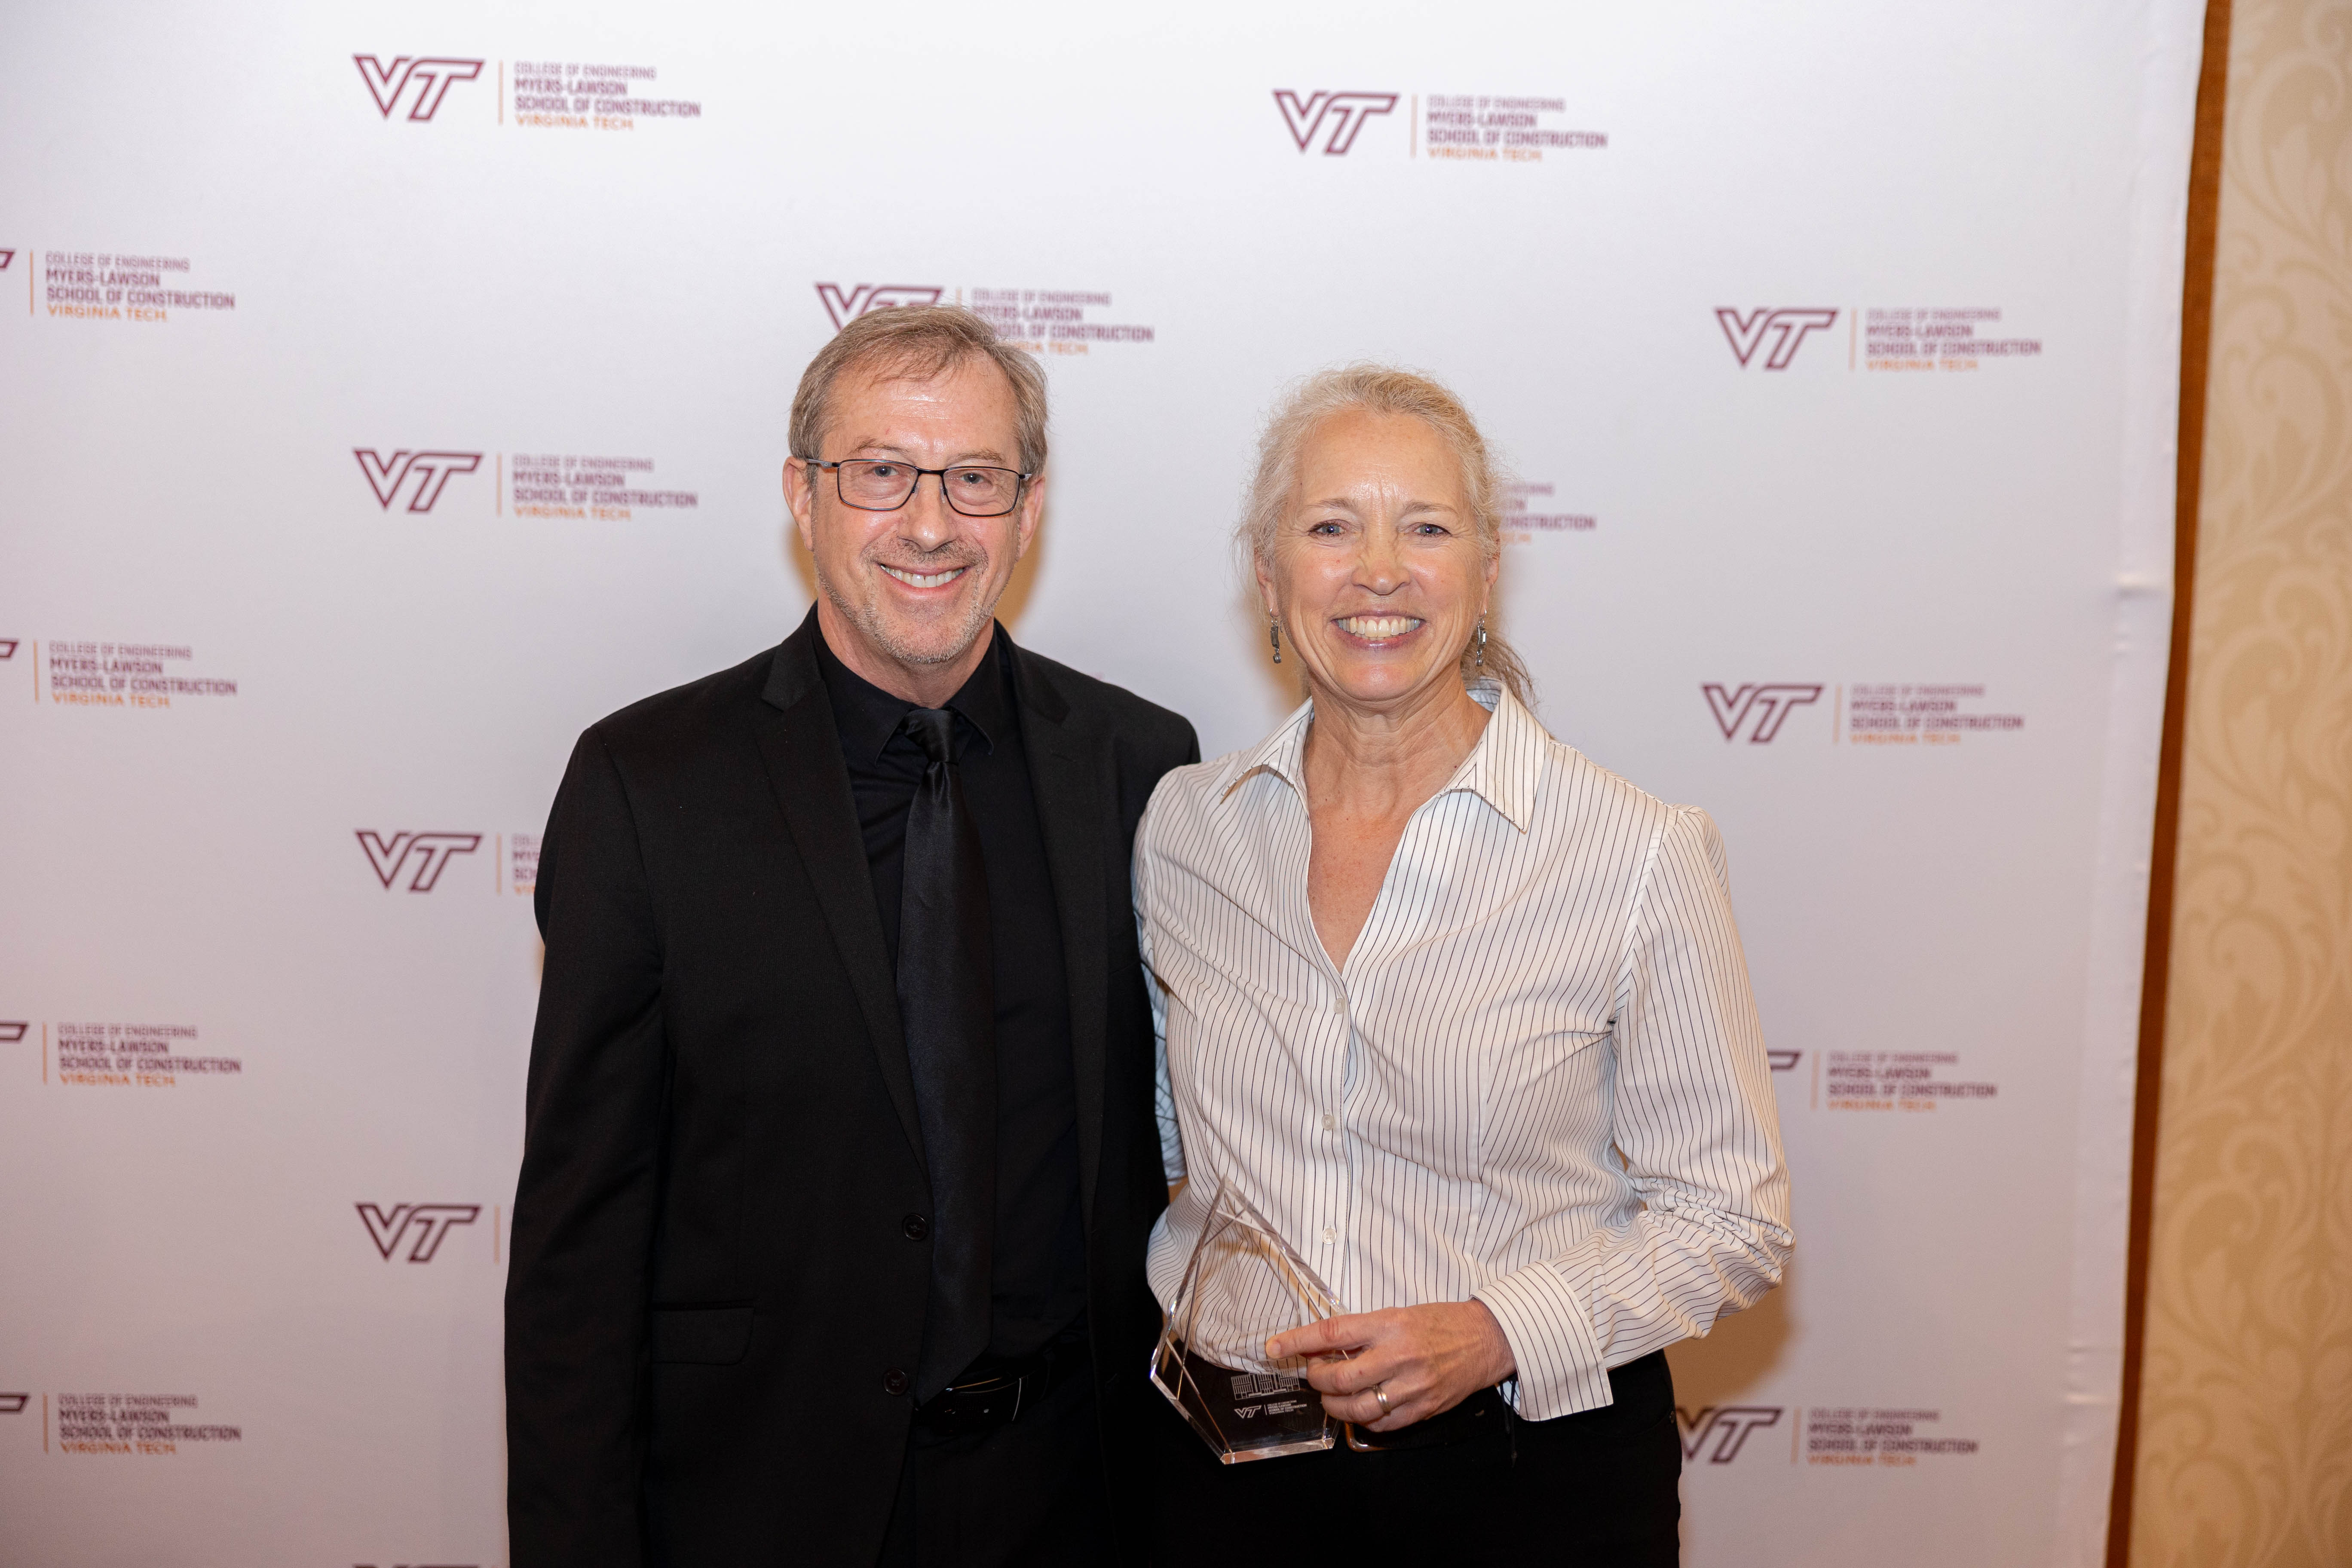 Brian Kleiner (at left) and Kirsten Leckszas '88. Photo by Will Drew for Virginia Tech